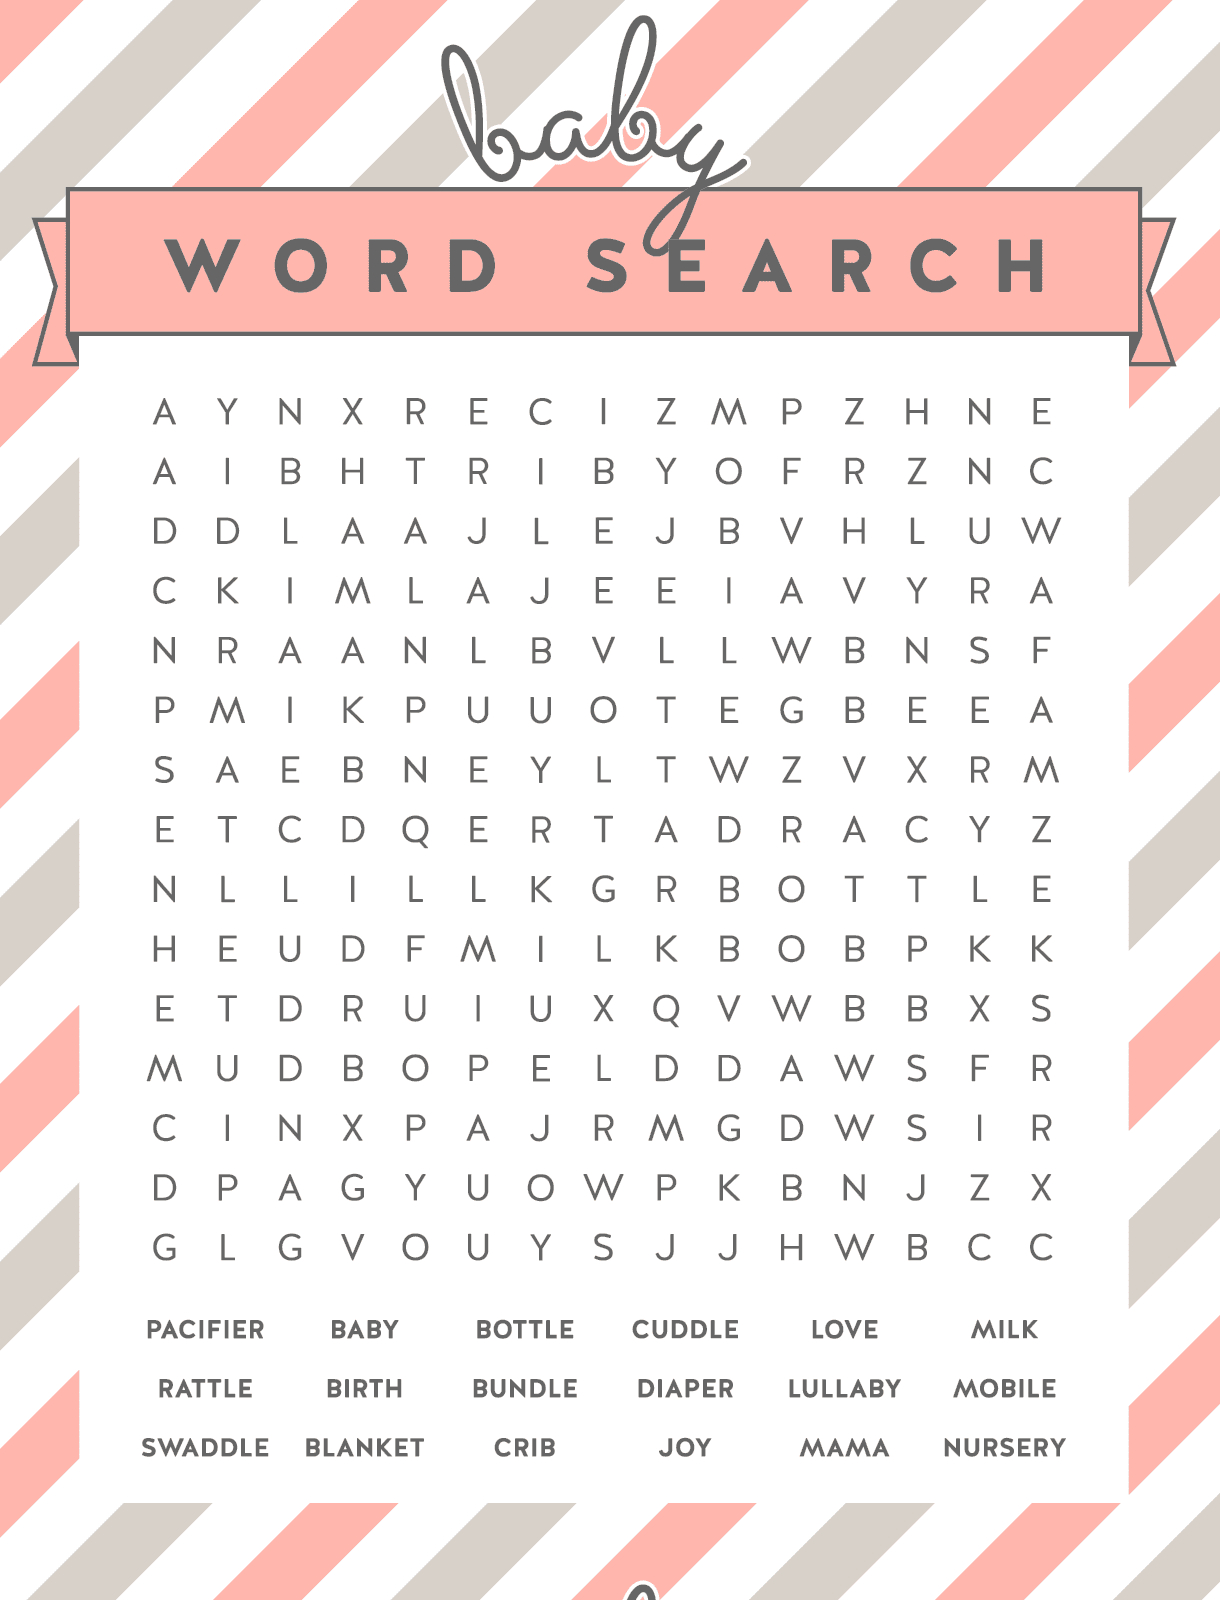 Free Baby Shower Word Search Puzzles - Free Baby Shower Games Printable Worksheets